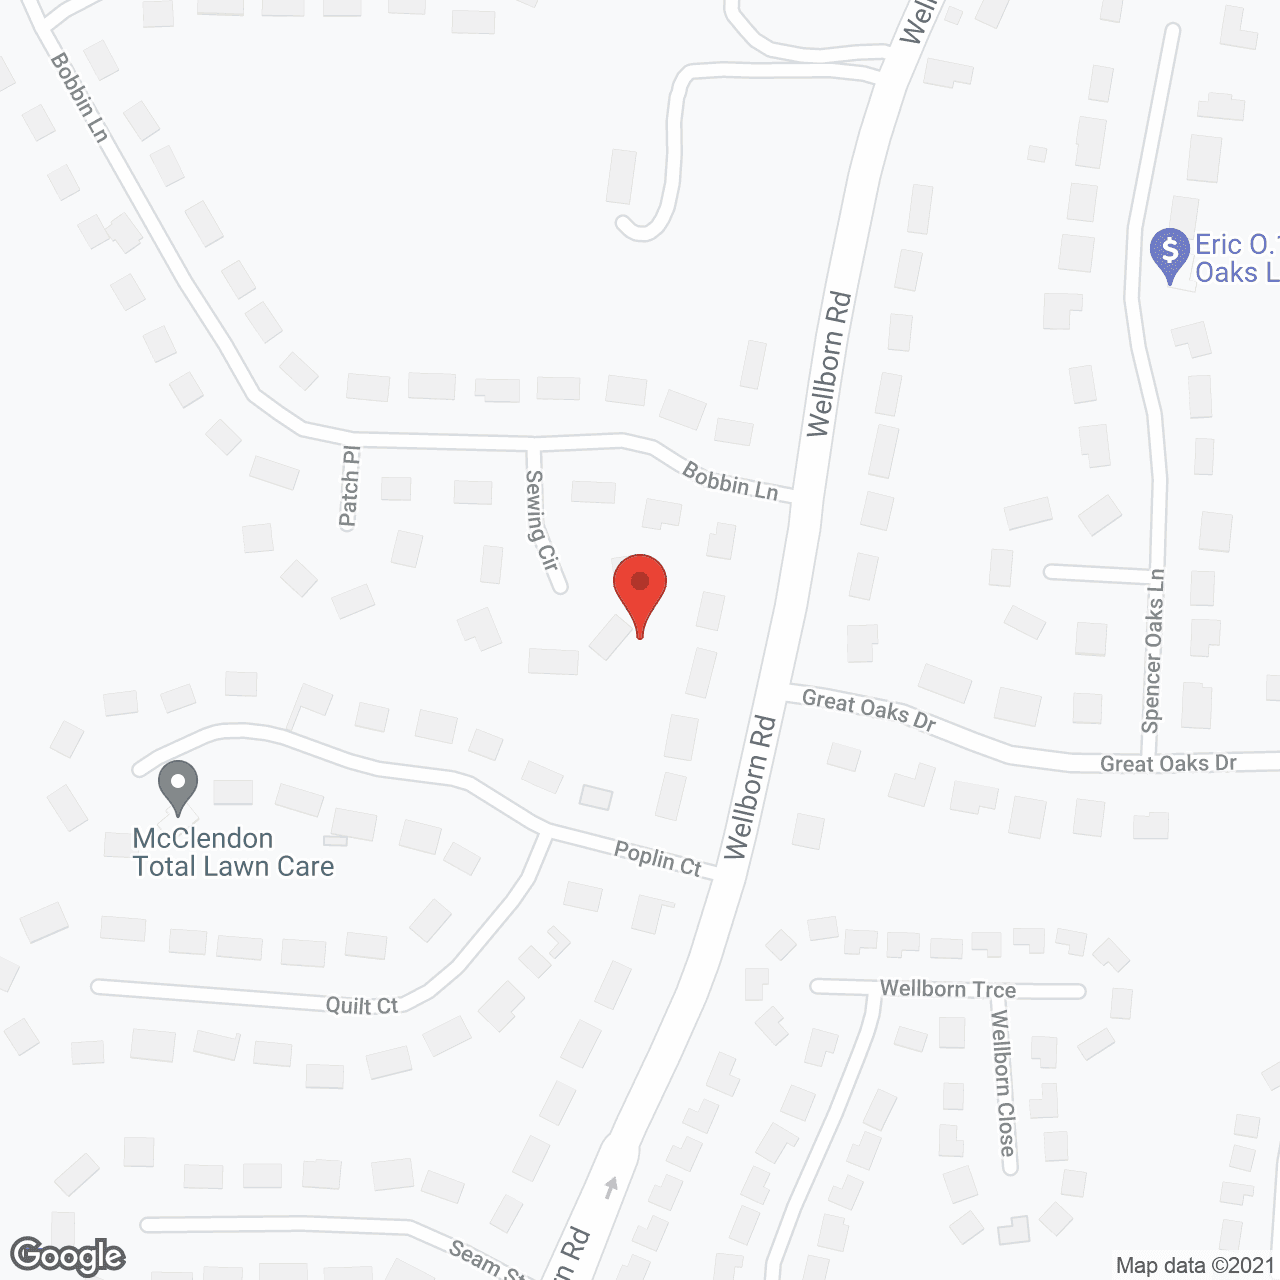 Patron Place Personal Care Home LLC #1 in google map